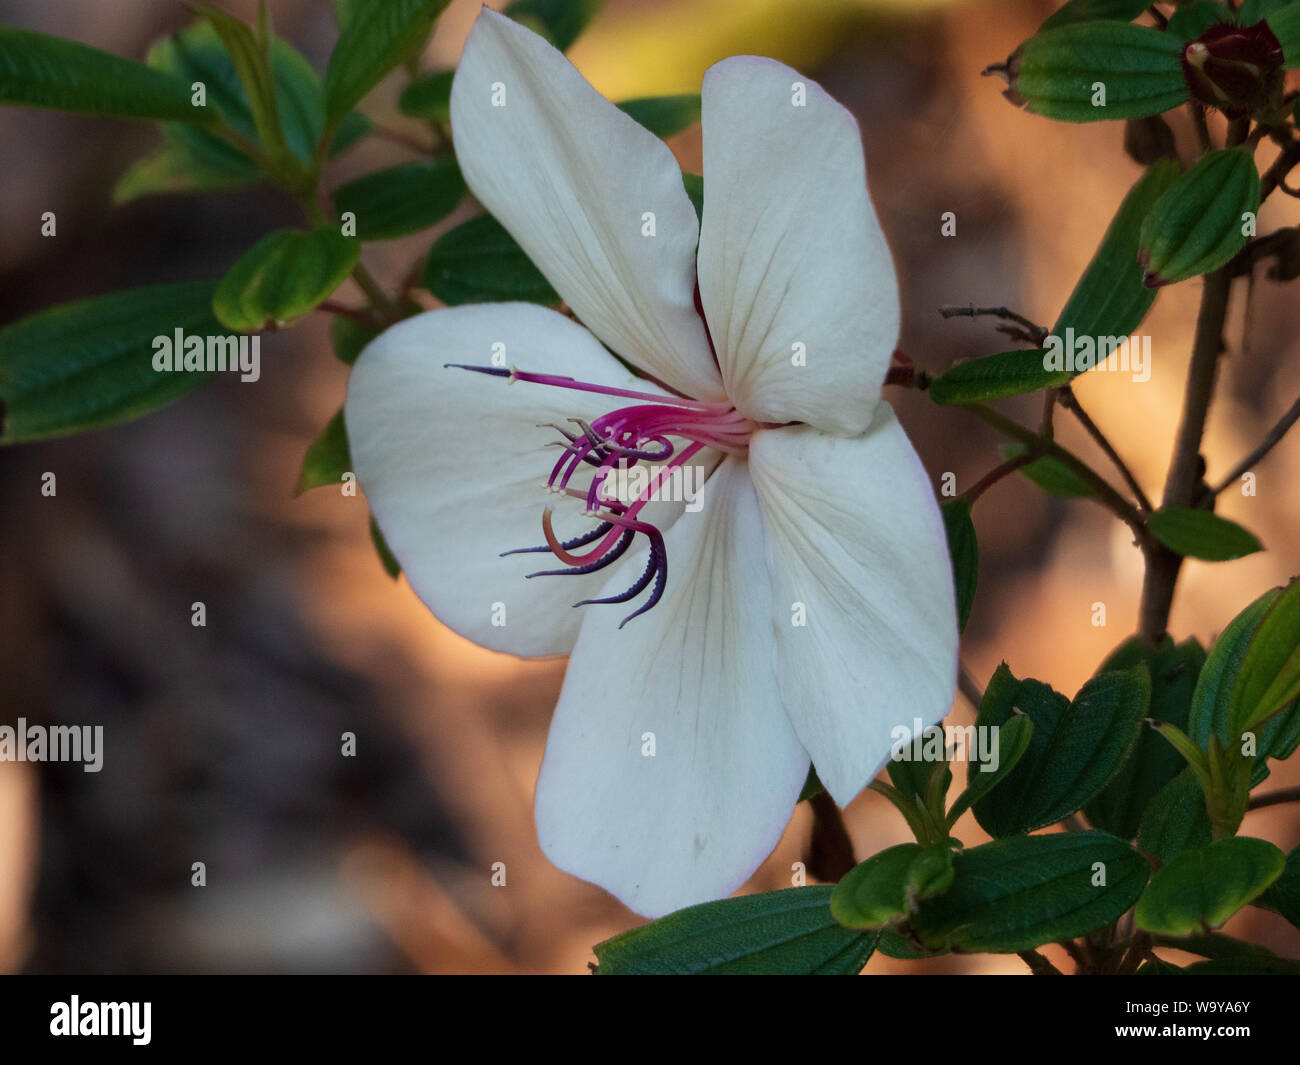 Pretty white Tibouchina Flower, Pink and purple stamens in centre, green leaves, sunlit orange brown background Stock Photo